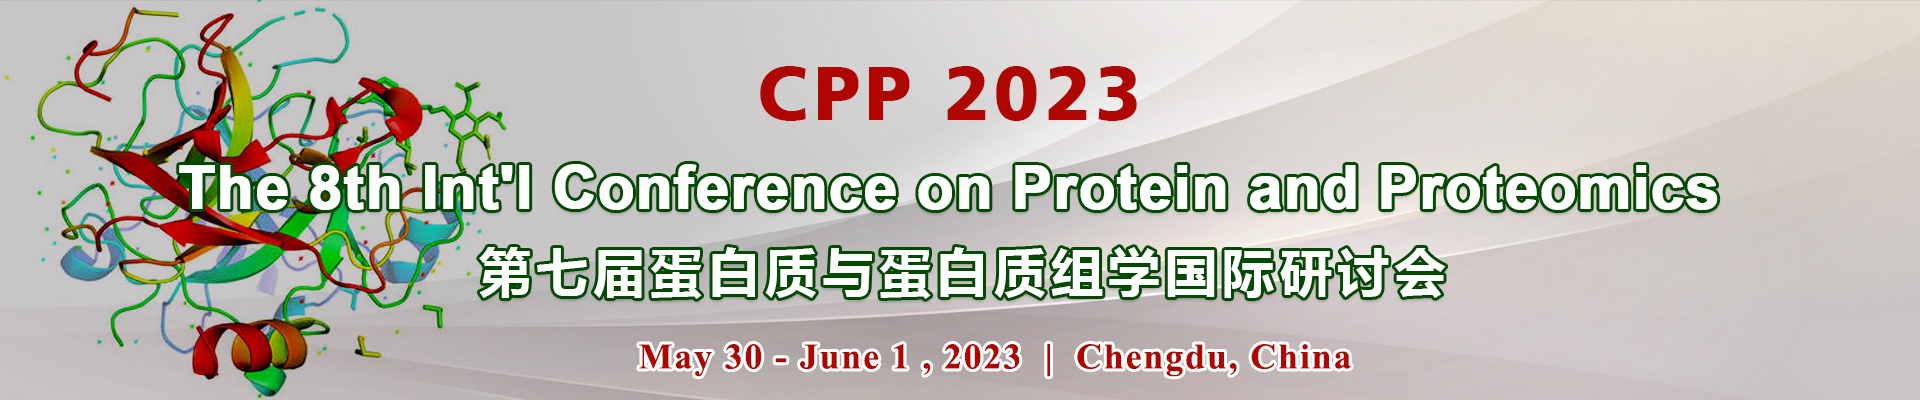 The 8th Int'l Conference on Protein and Proteomics (CPP 2023), Online Event